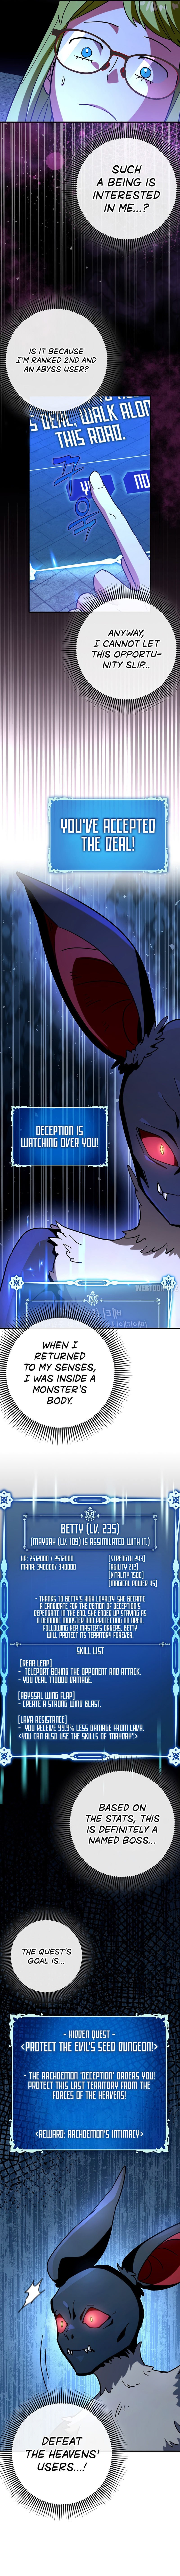 hard-carry-support-chap-34-8